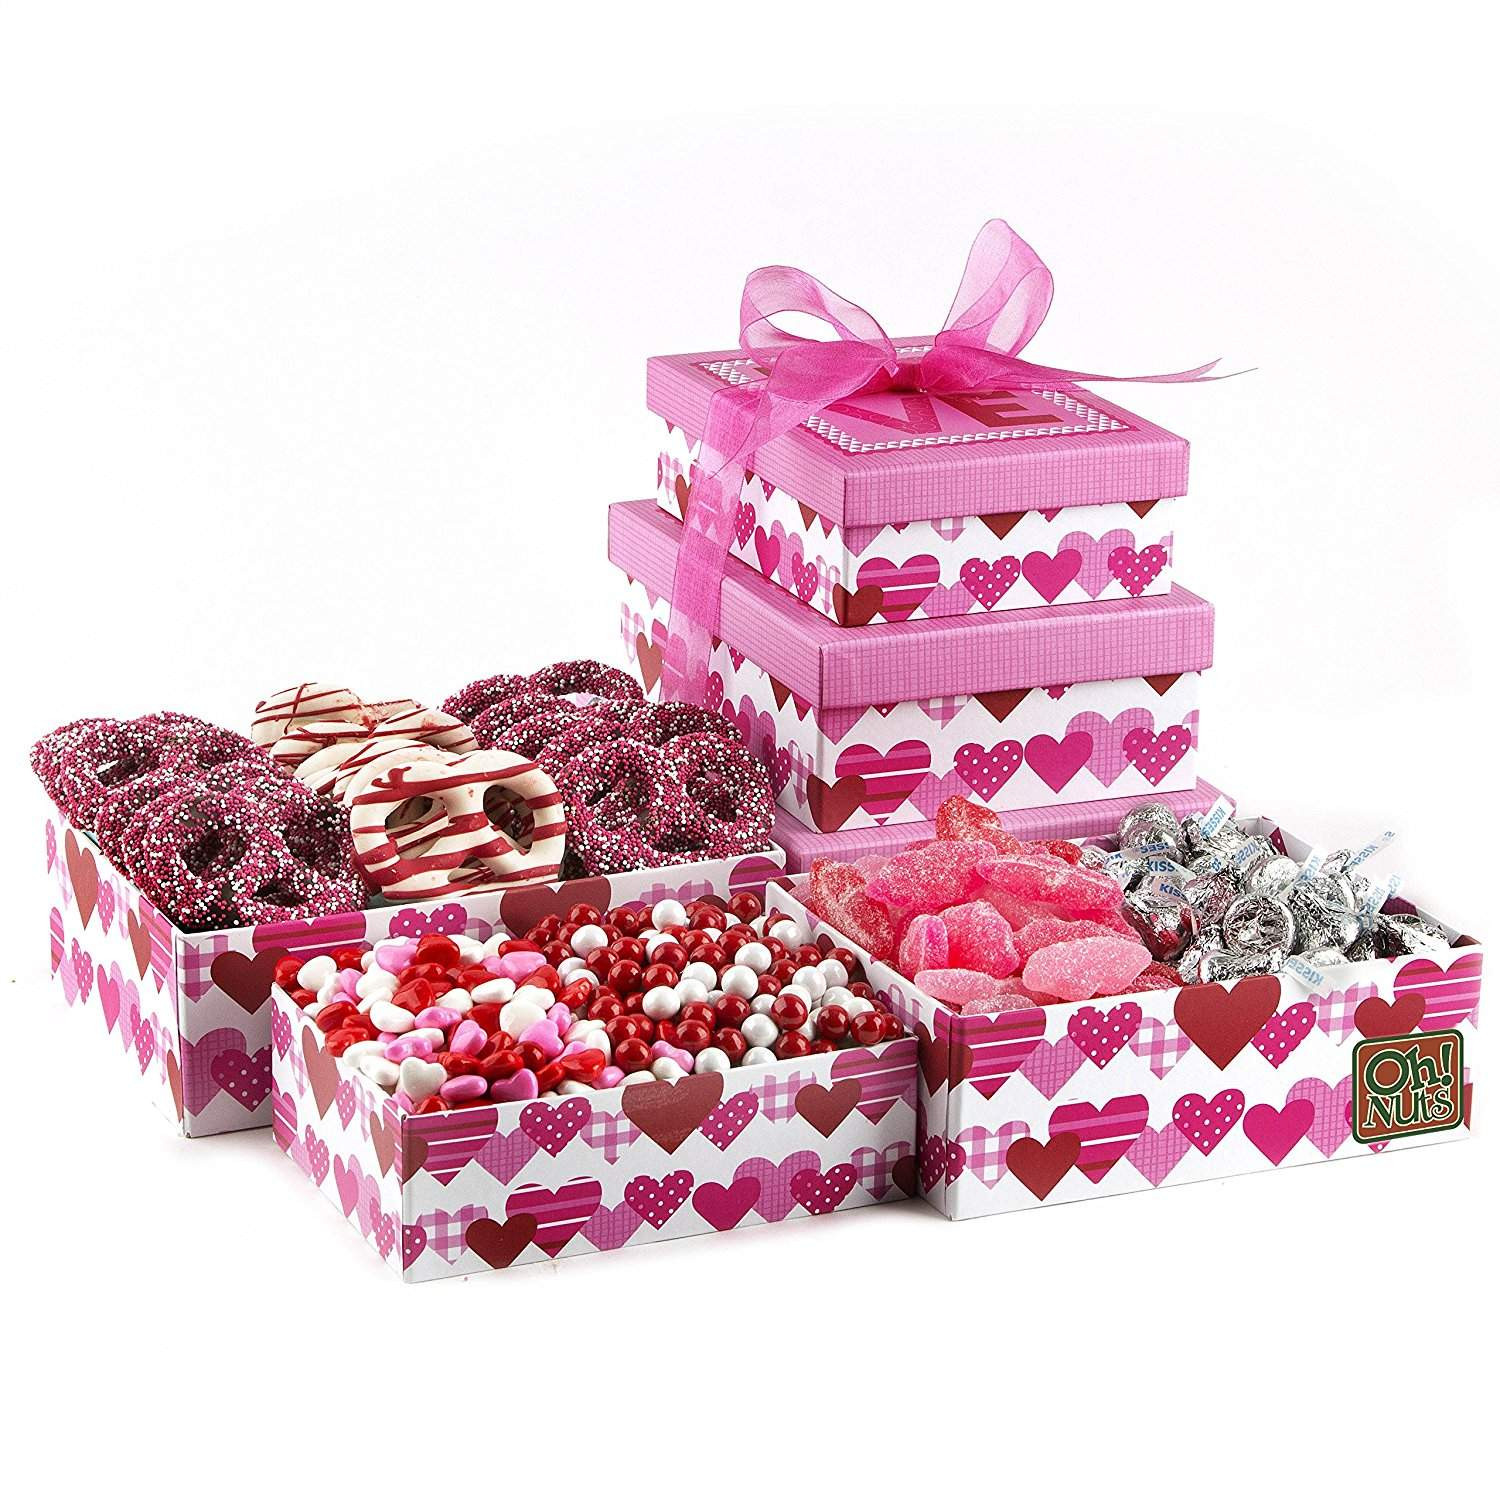 Valentines Day Chocolate Gift
 Top 10 Best Valentine’s Day Candy Gift Ideas